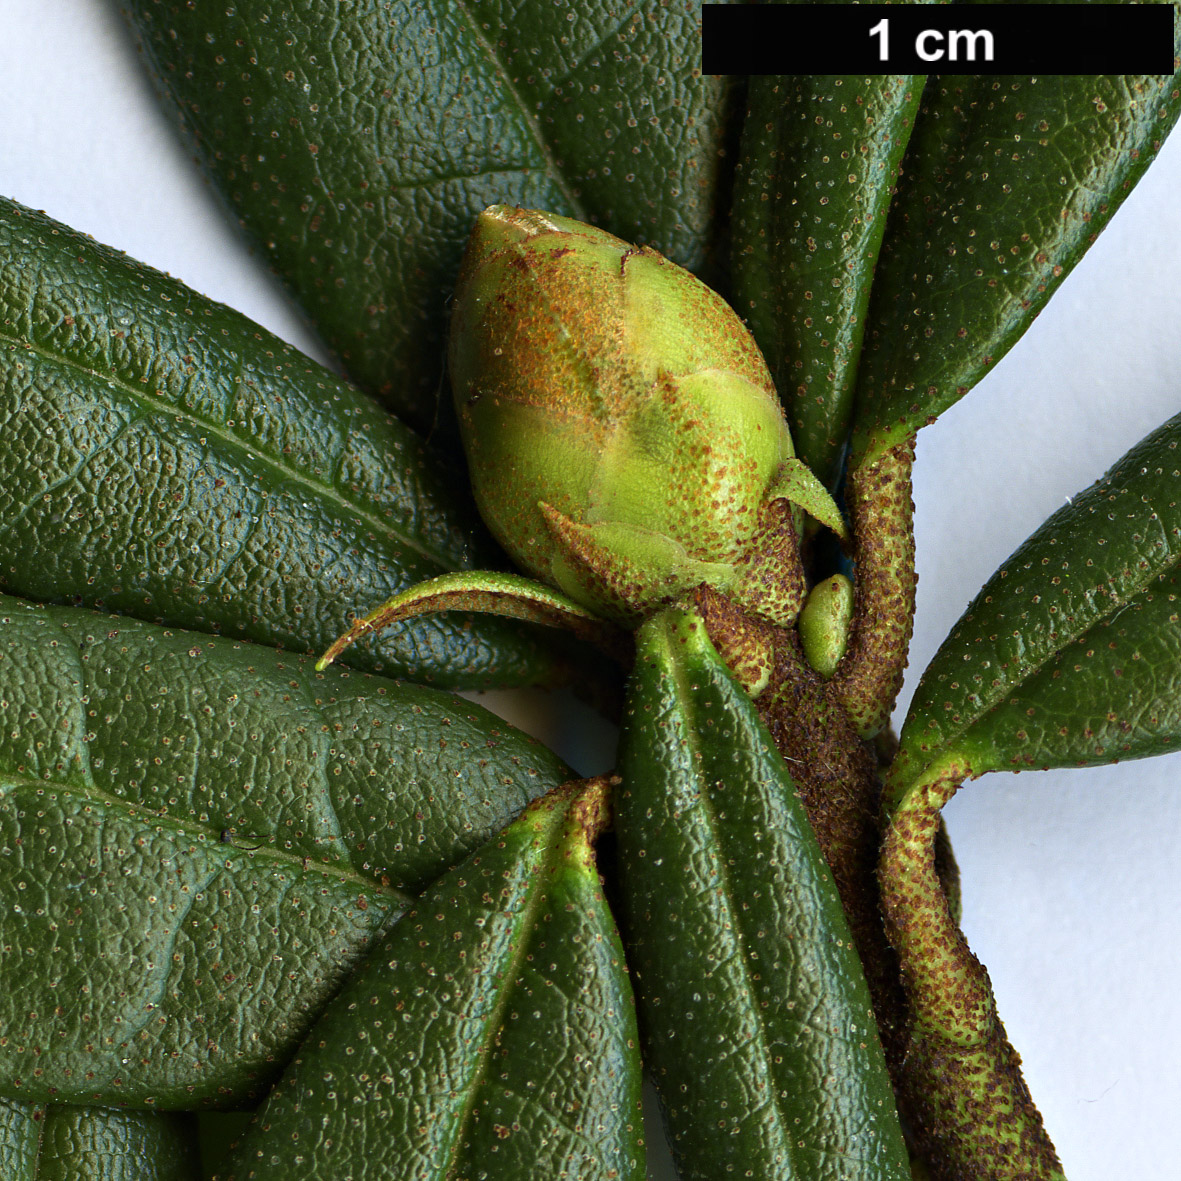 High resolution image: Family: Ericaceae - Genus: Rhododendron - Taxon: polylepis